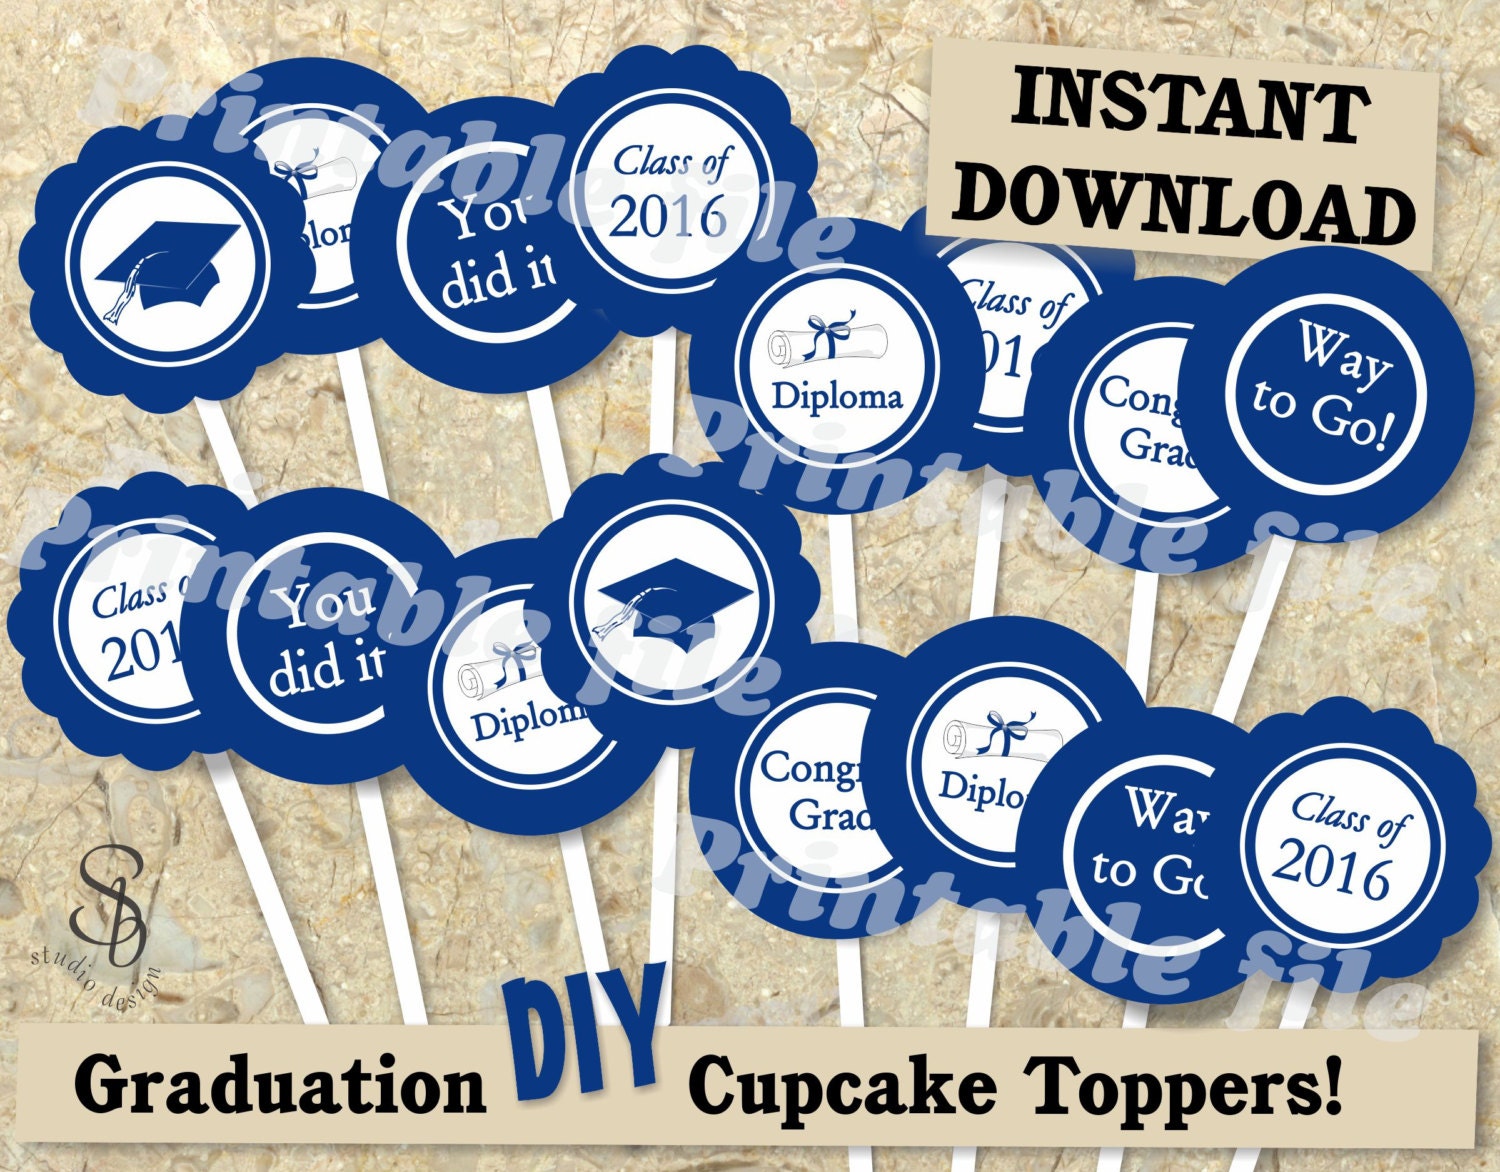 Graduation cupcake topper in blue and white printable template